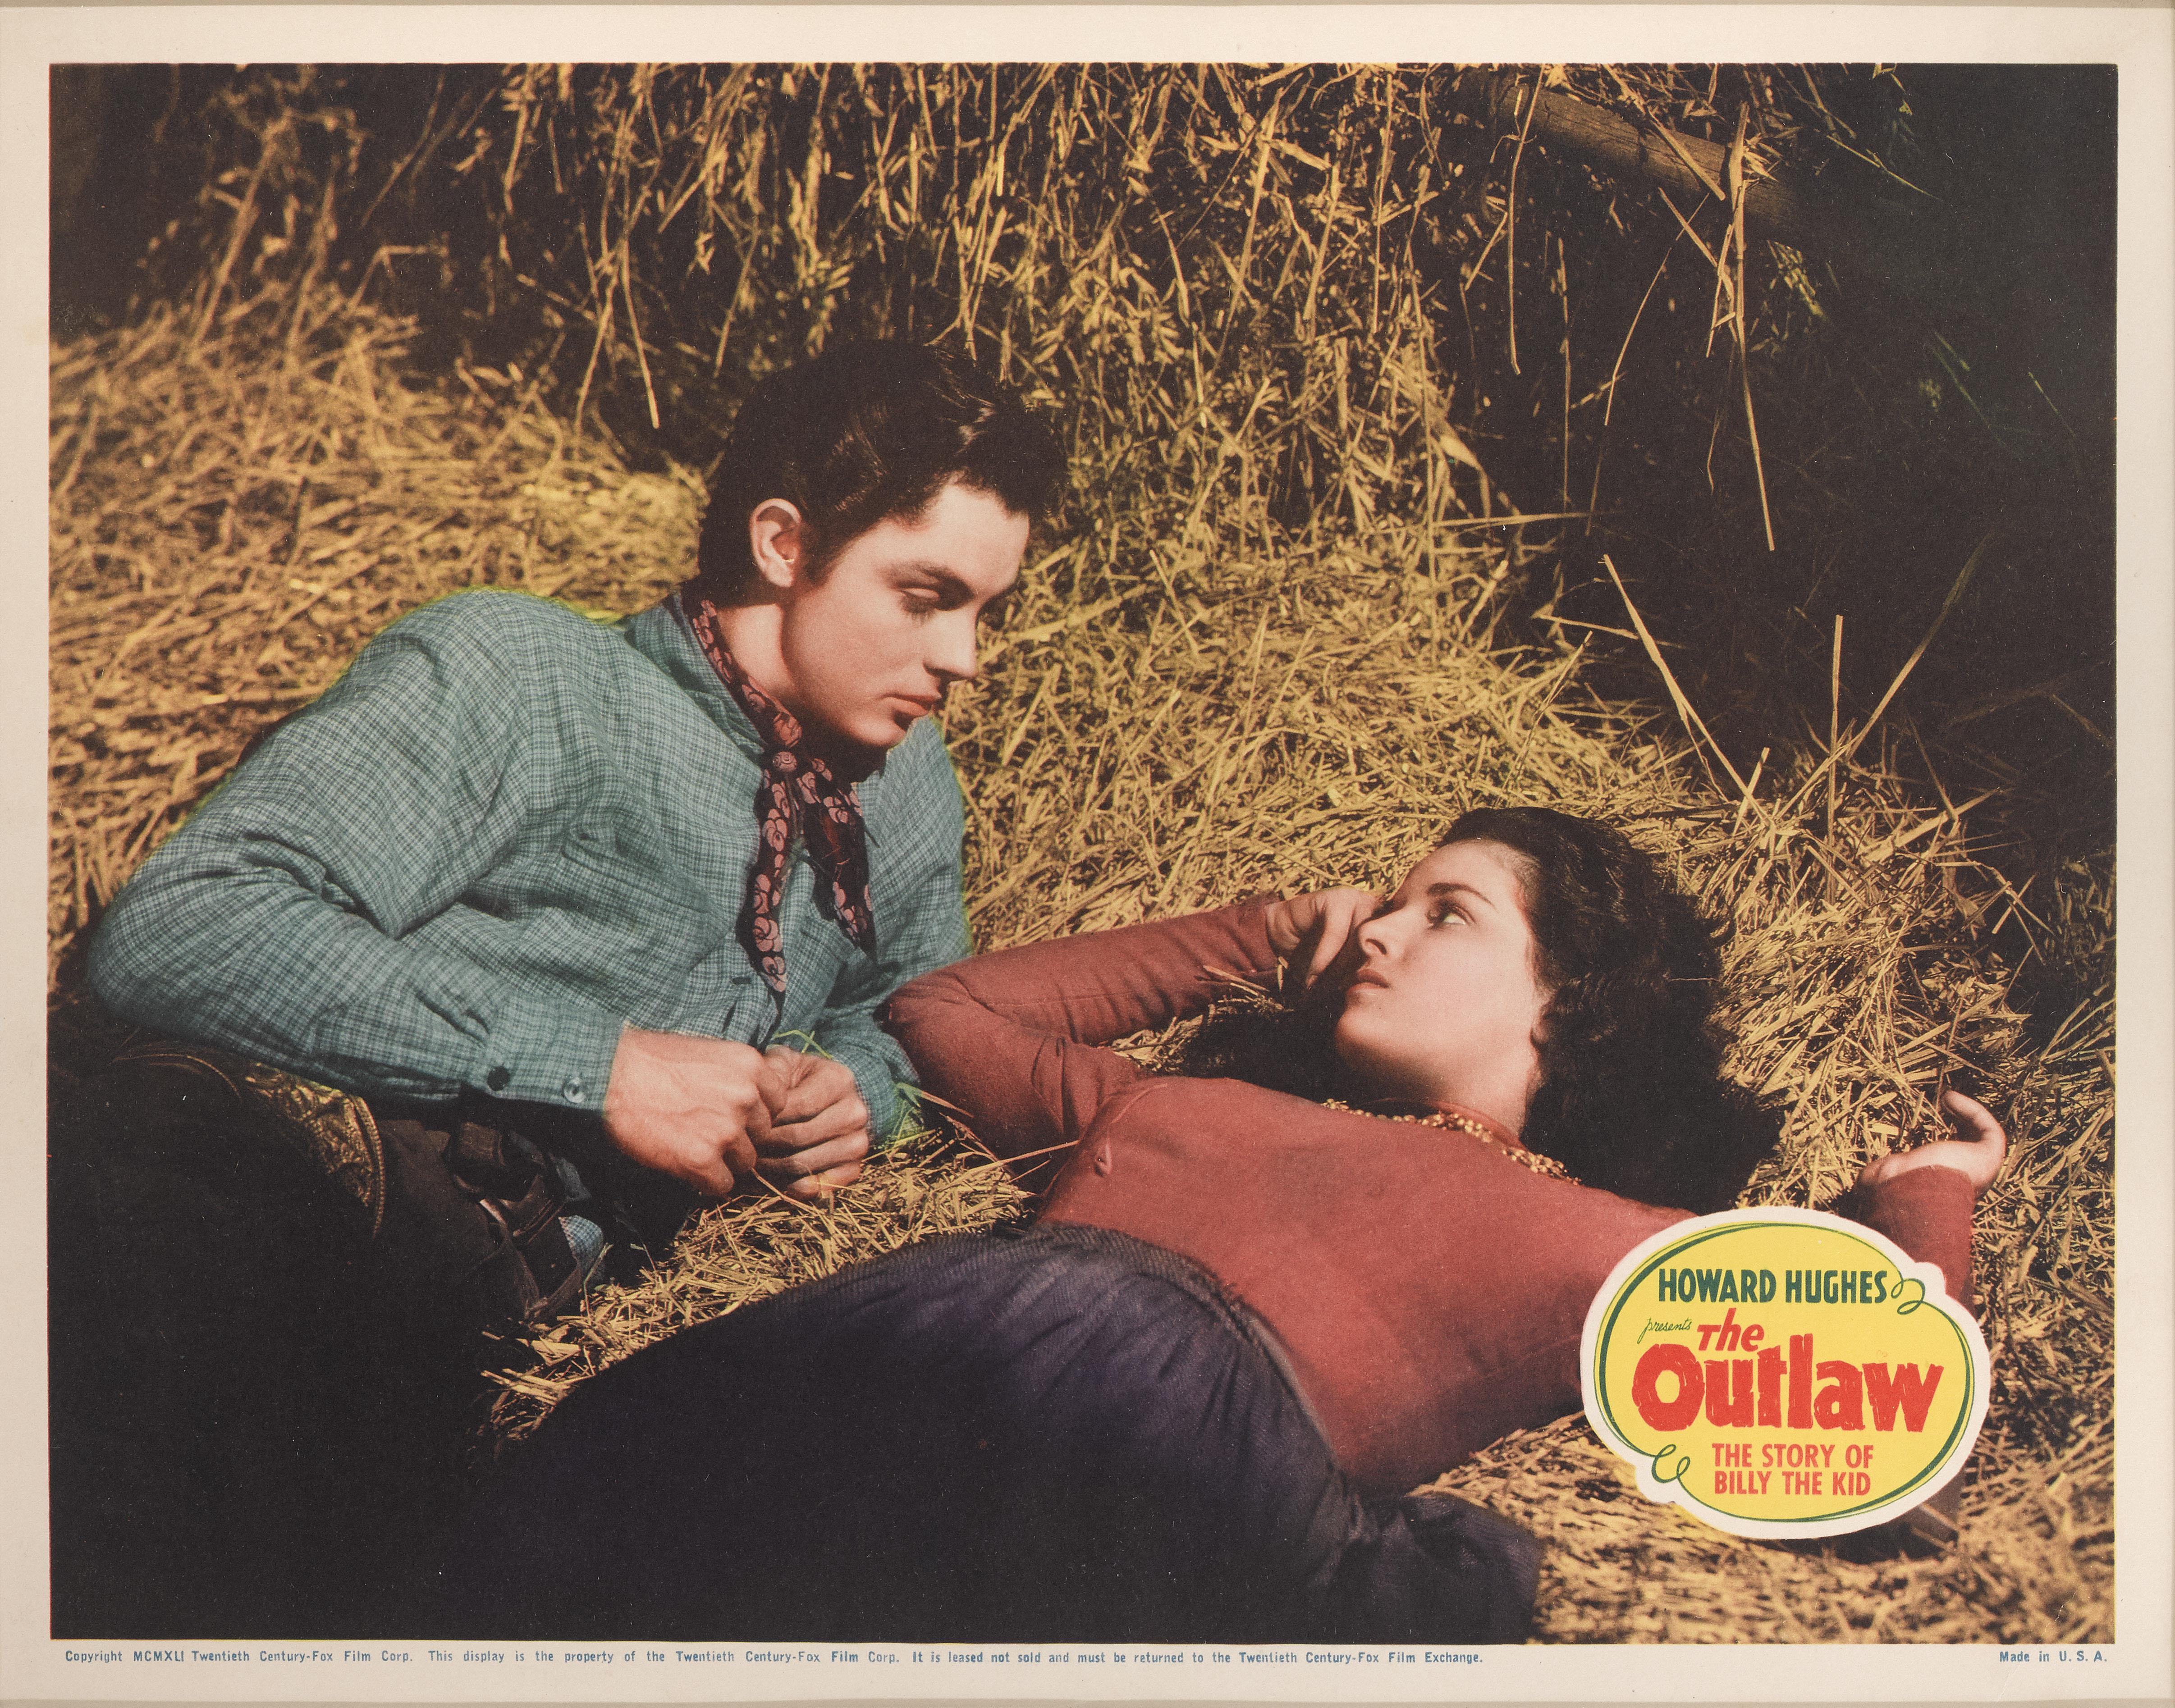 Original US lobby card for the 1942 Western The Outlaw.
This film was produced and directed by Howard Hughes, and stars Jack Buetel, Thomas Mitchell and Jane Russell. It tells the story of Pat Garrett, Doc Holliday and Billy the Kid. This film was